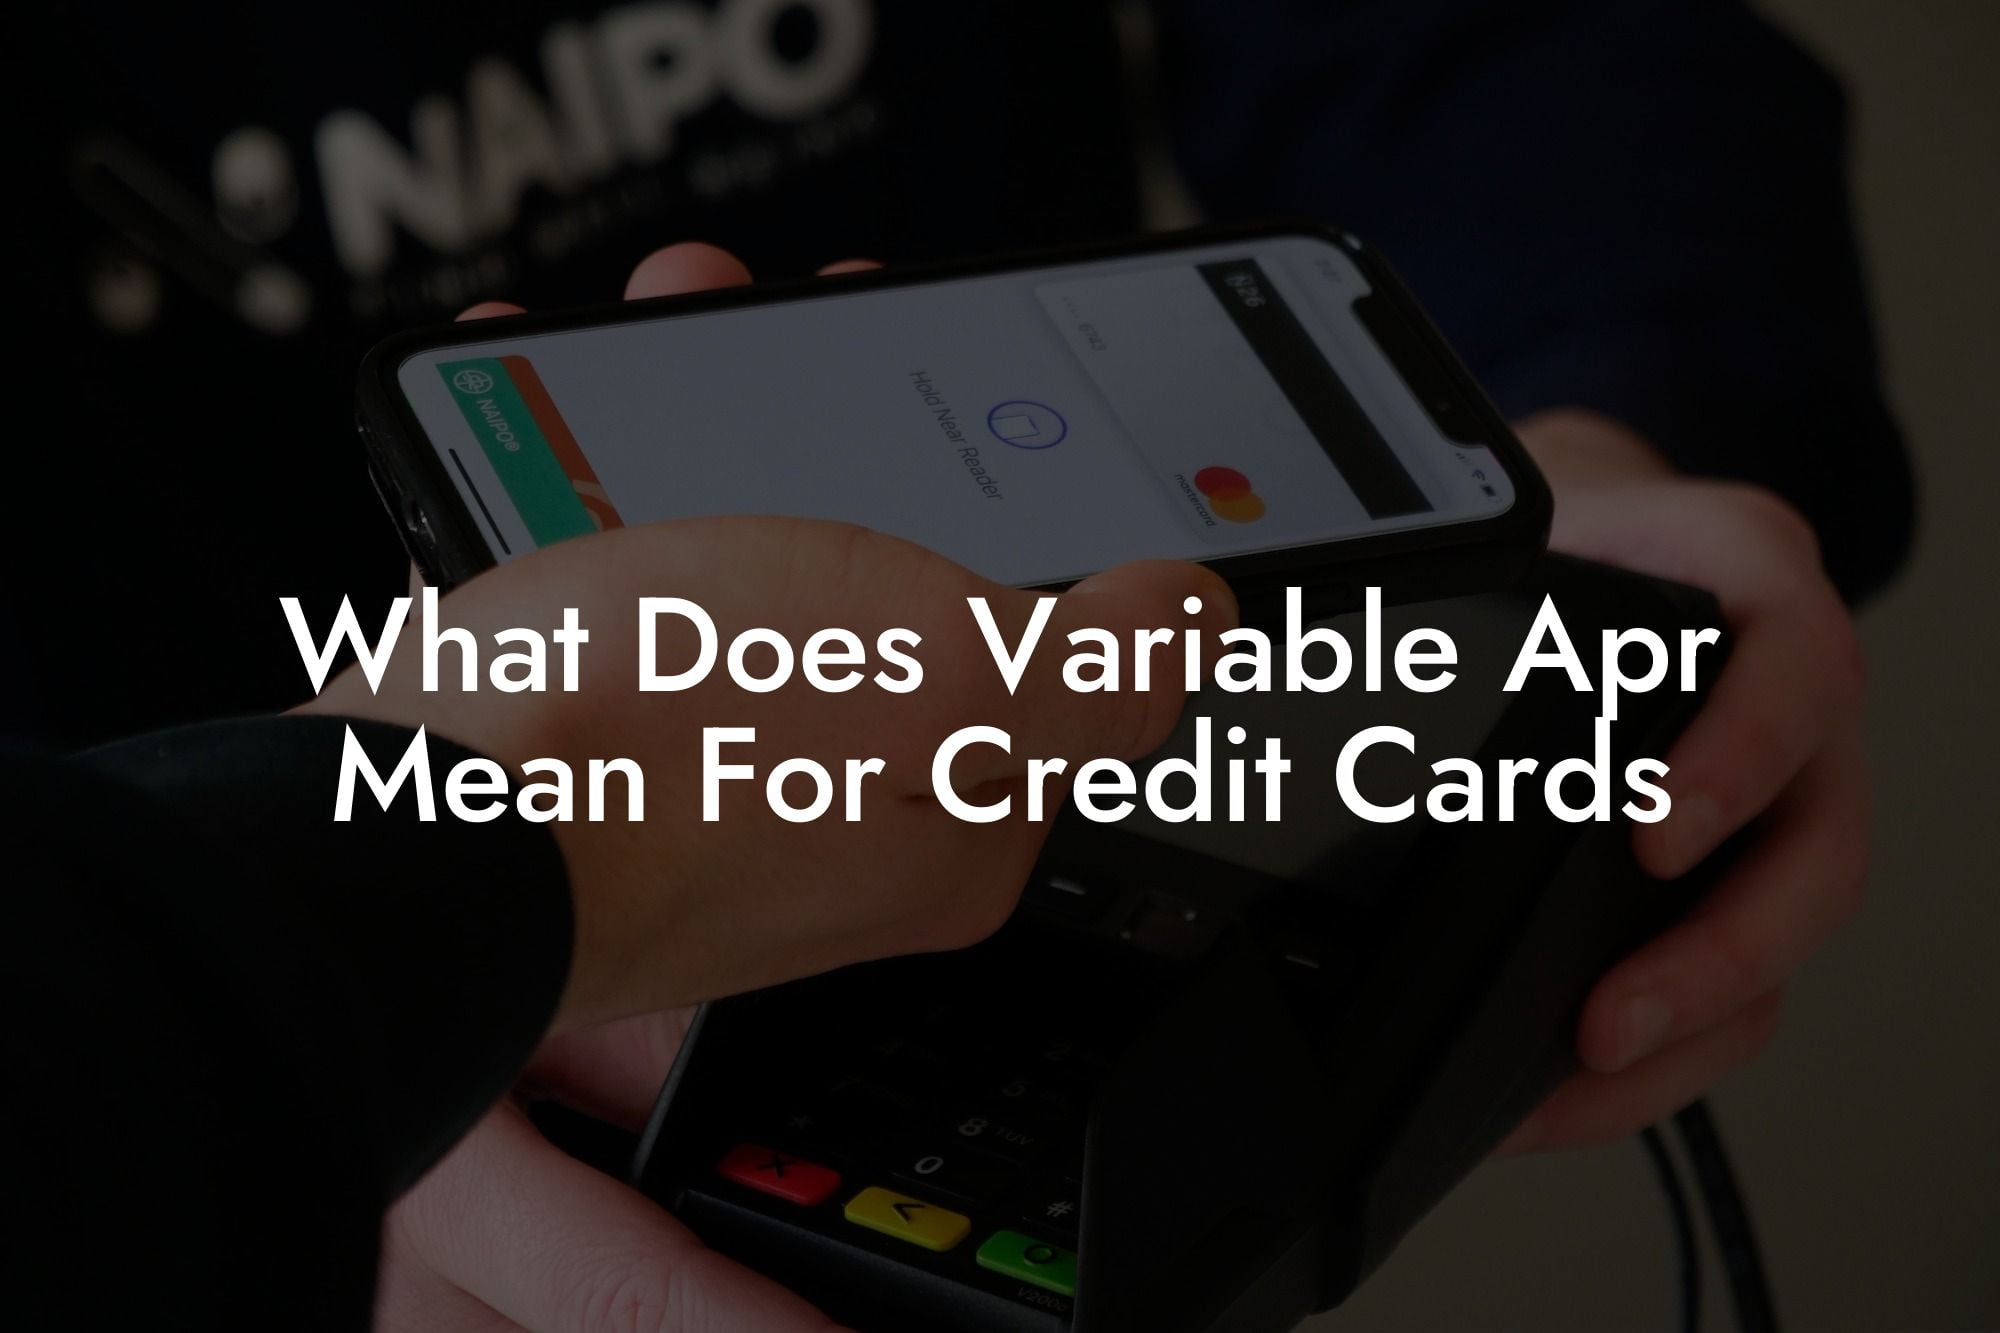 What Does Variable Apr Mean For Credit Cards